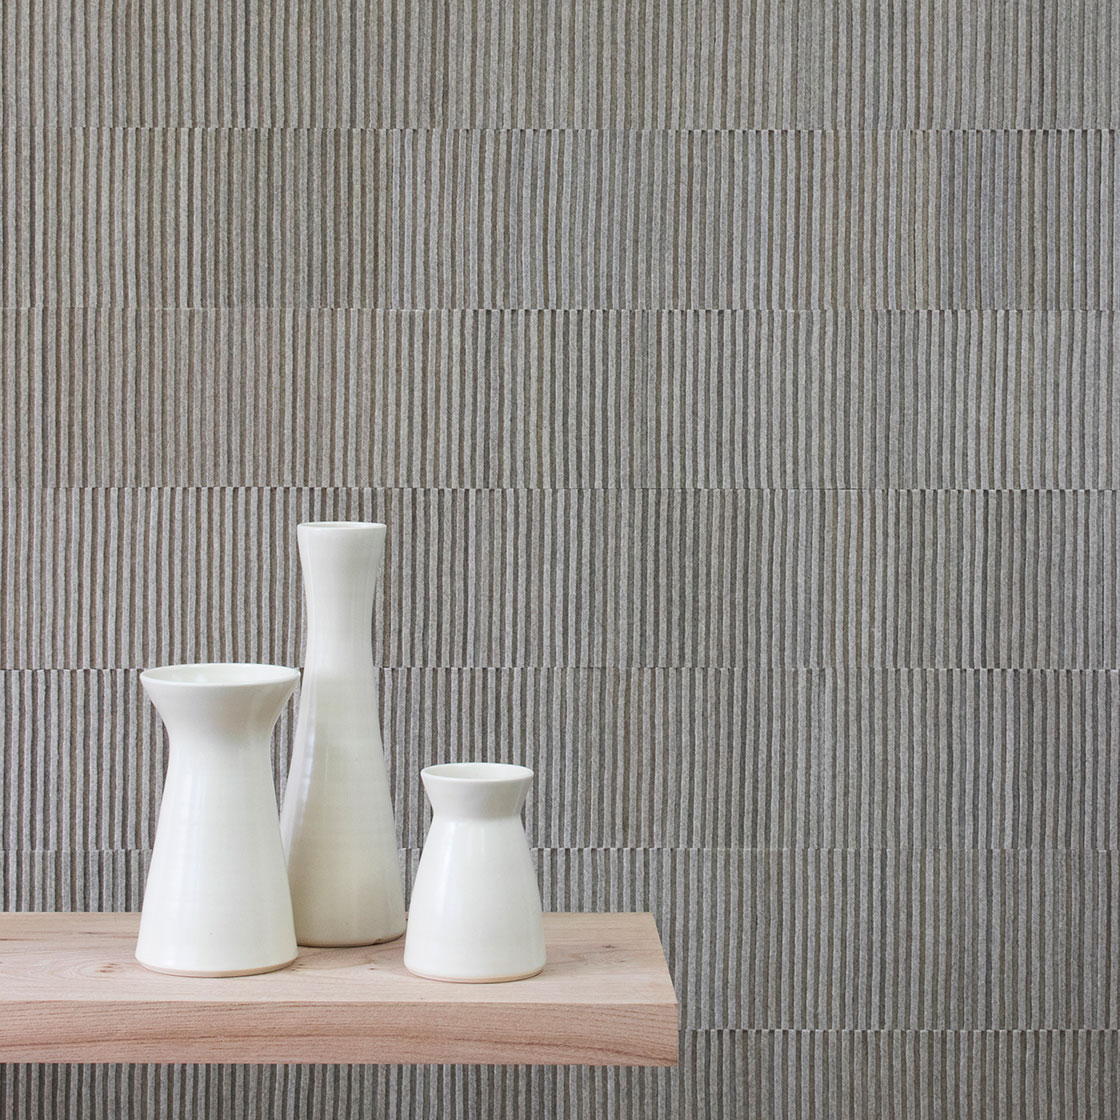 Ribbed wall covering in a gray heathered felt. In the foreground are three white ceramic vases on a wood shelf.